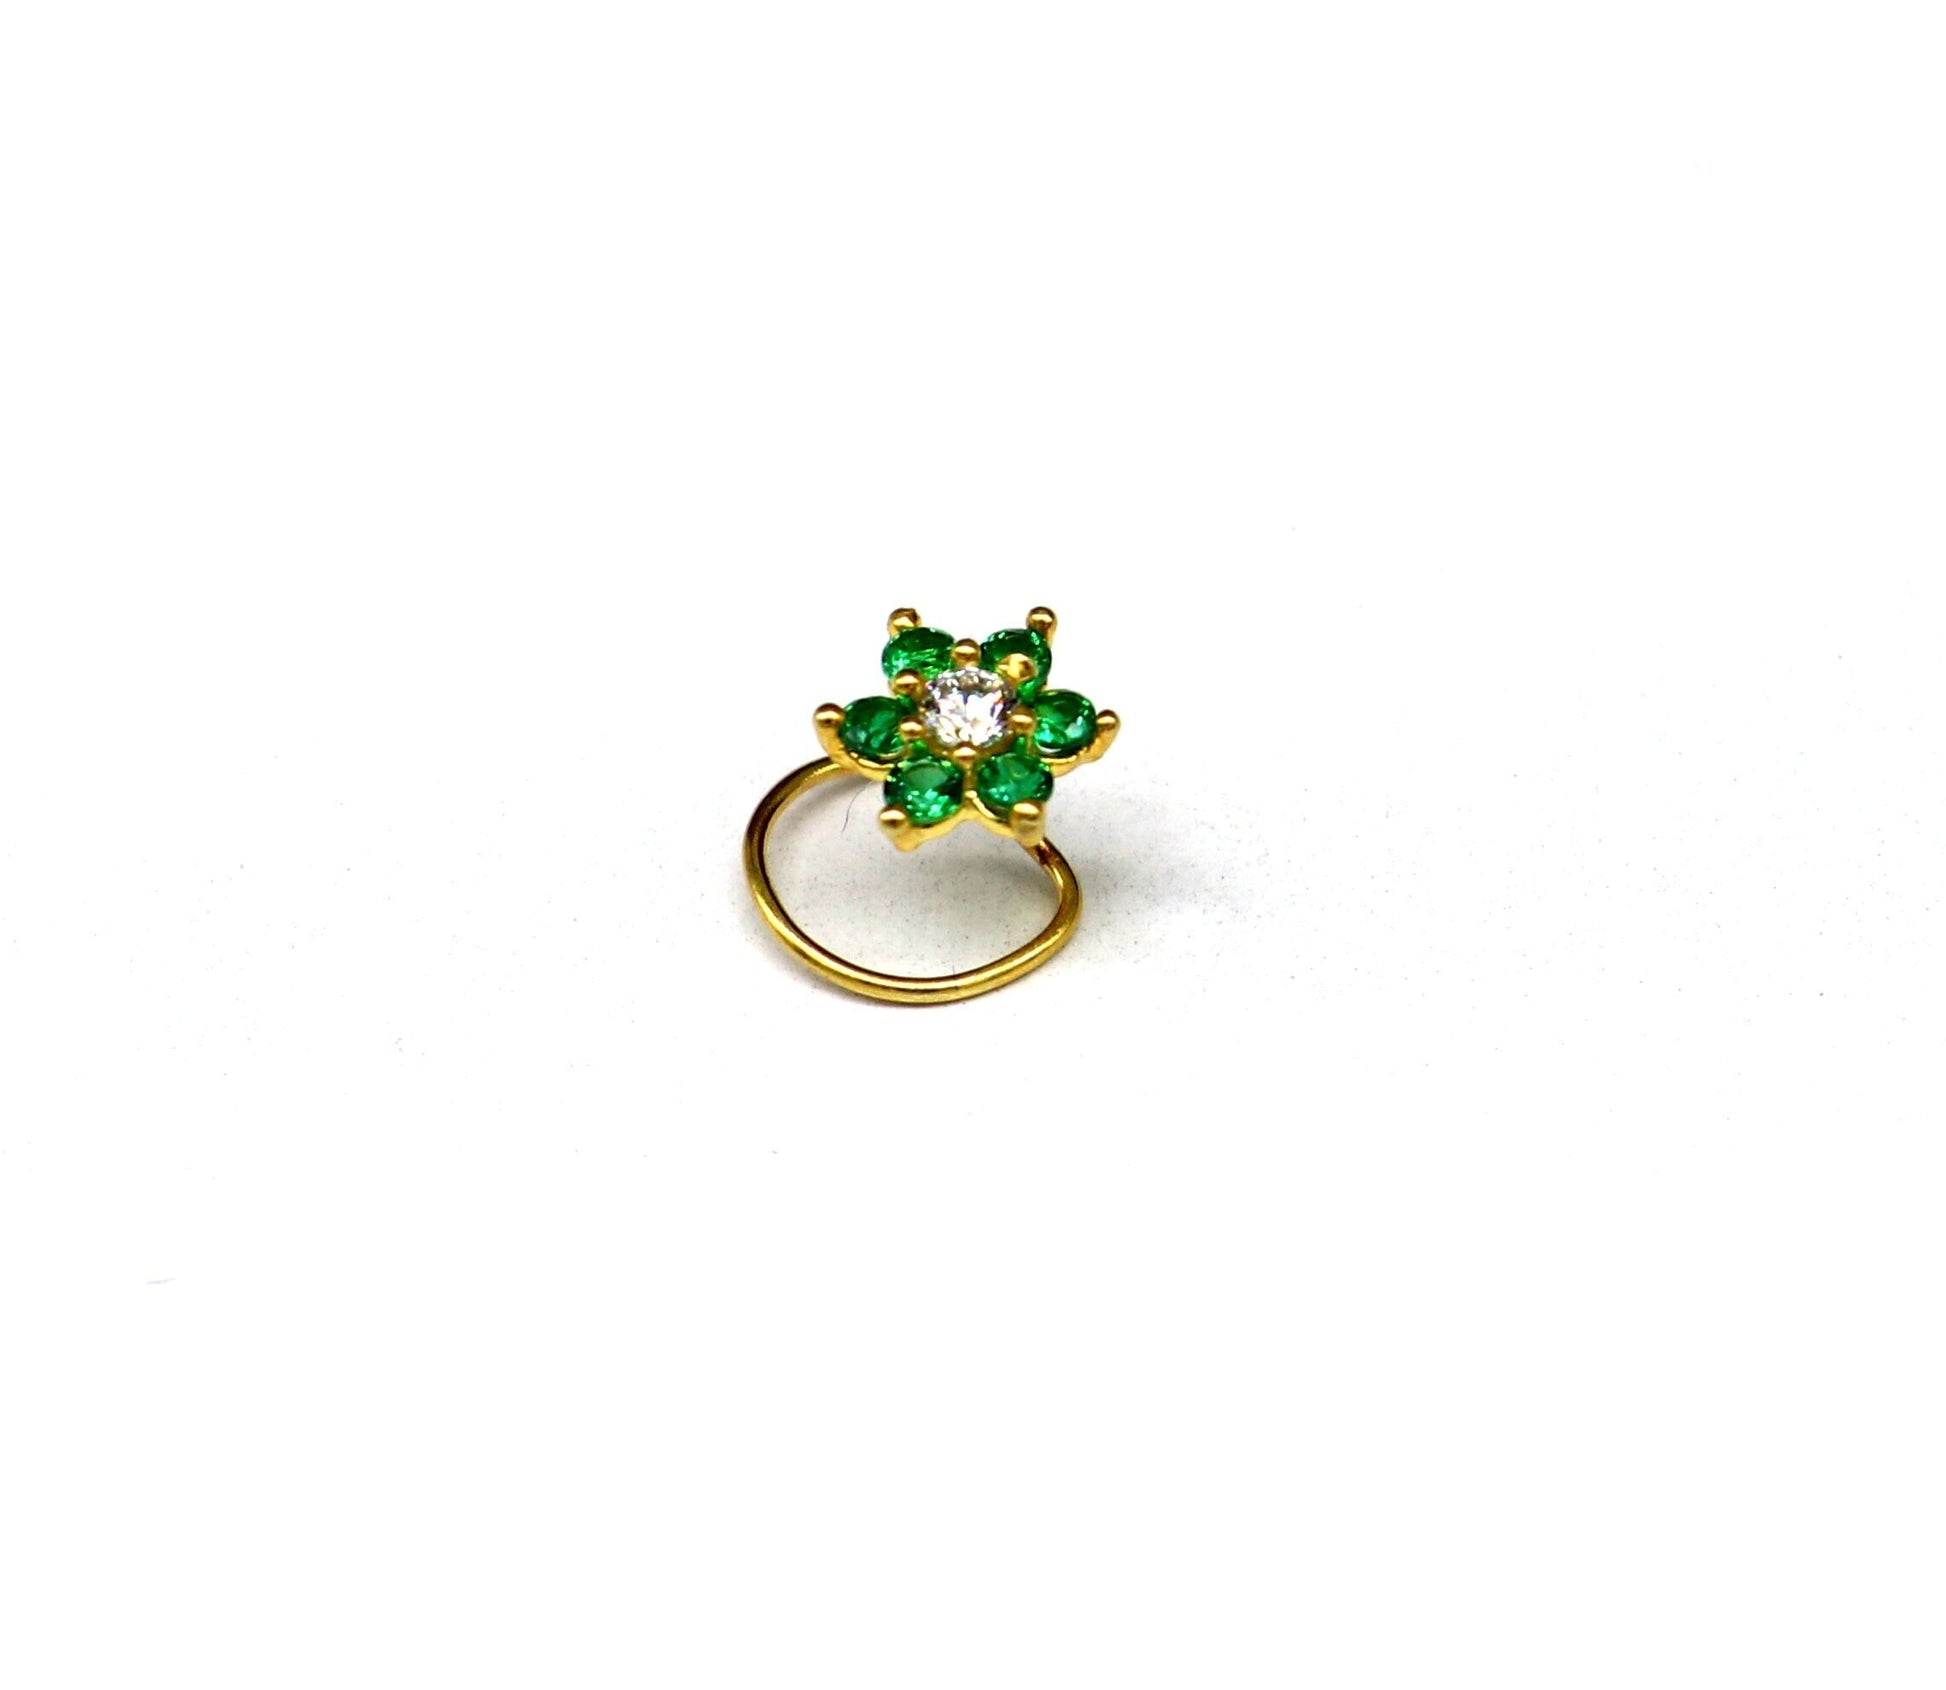 DeRosa Green Rhinestones Stylized Flower and Stamen Fur Clip in A Gold Plated Sterling Silver Setting